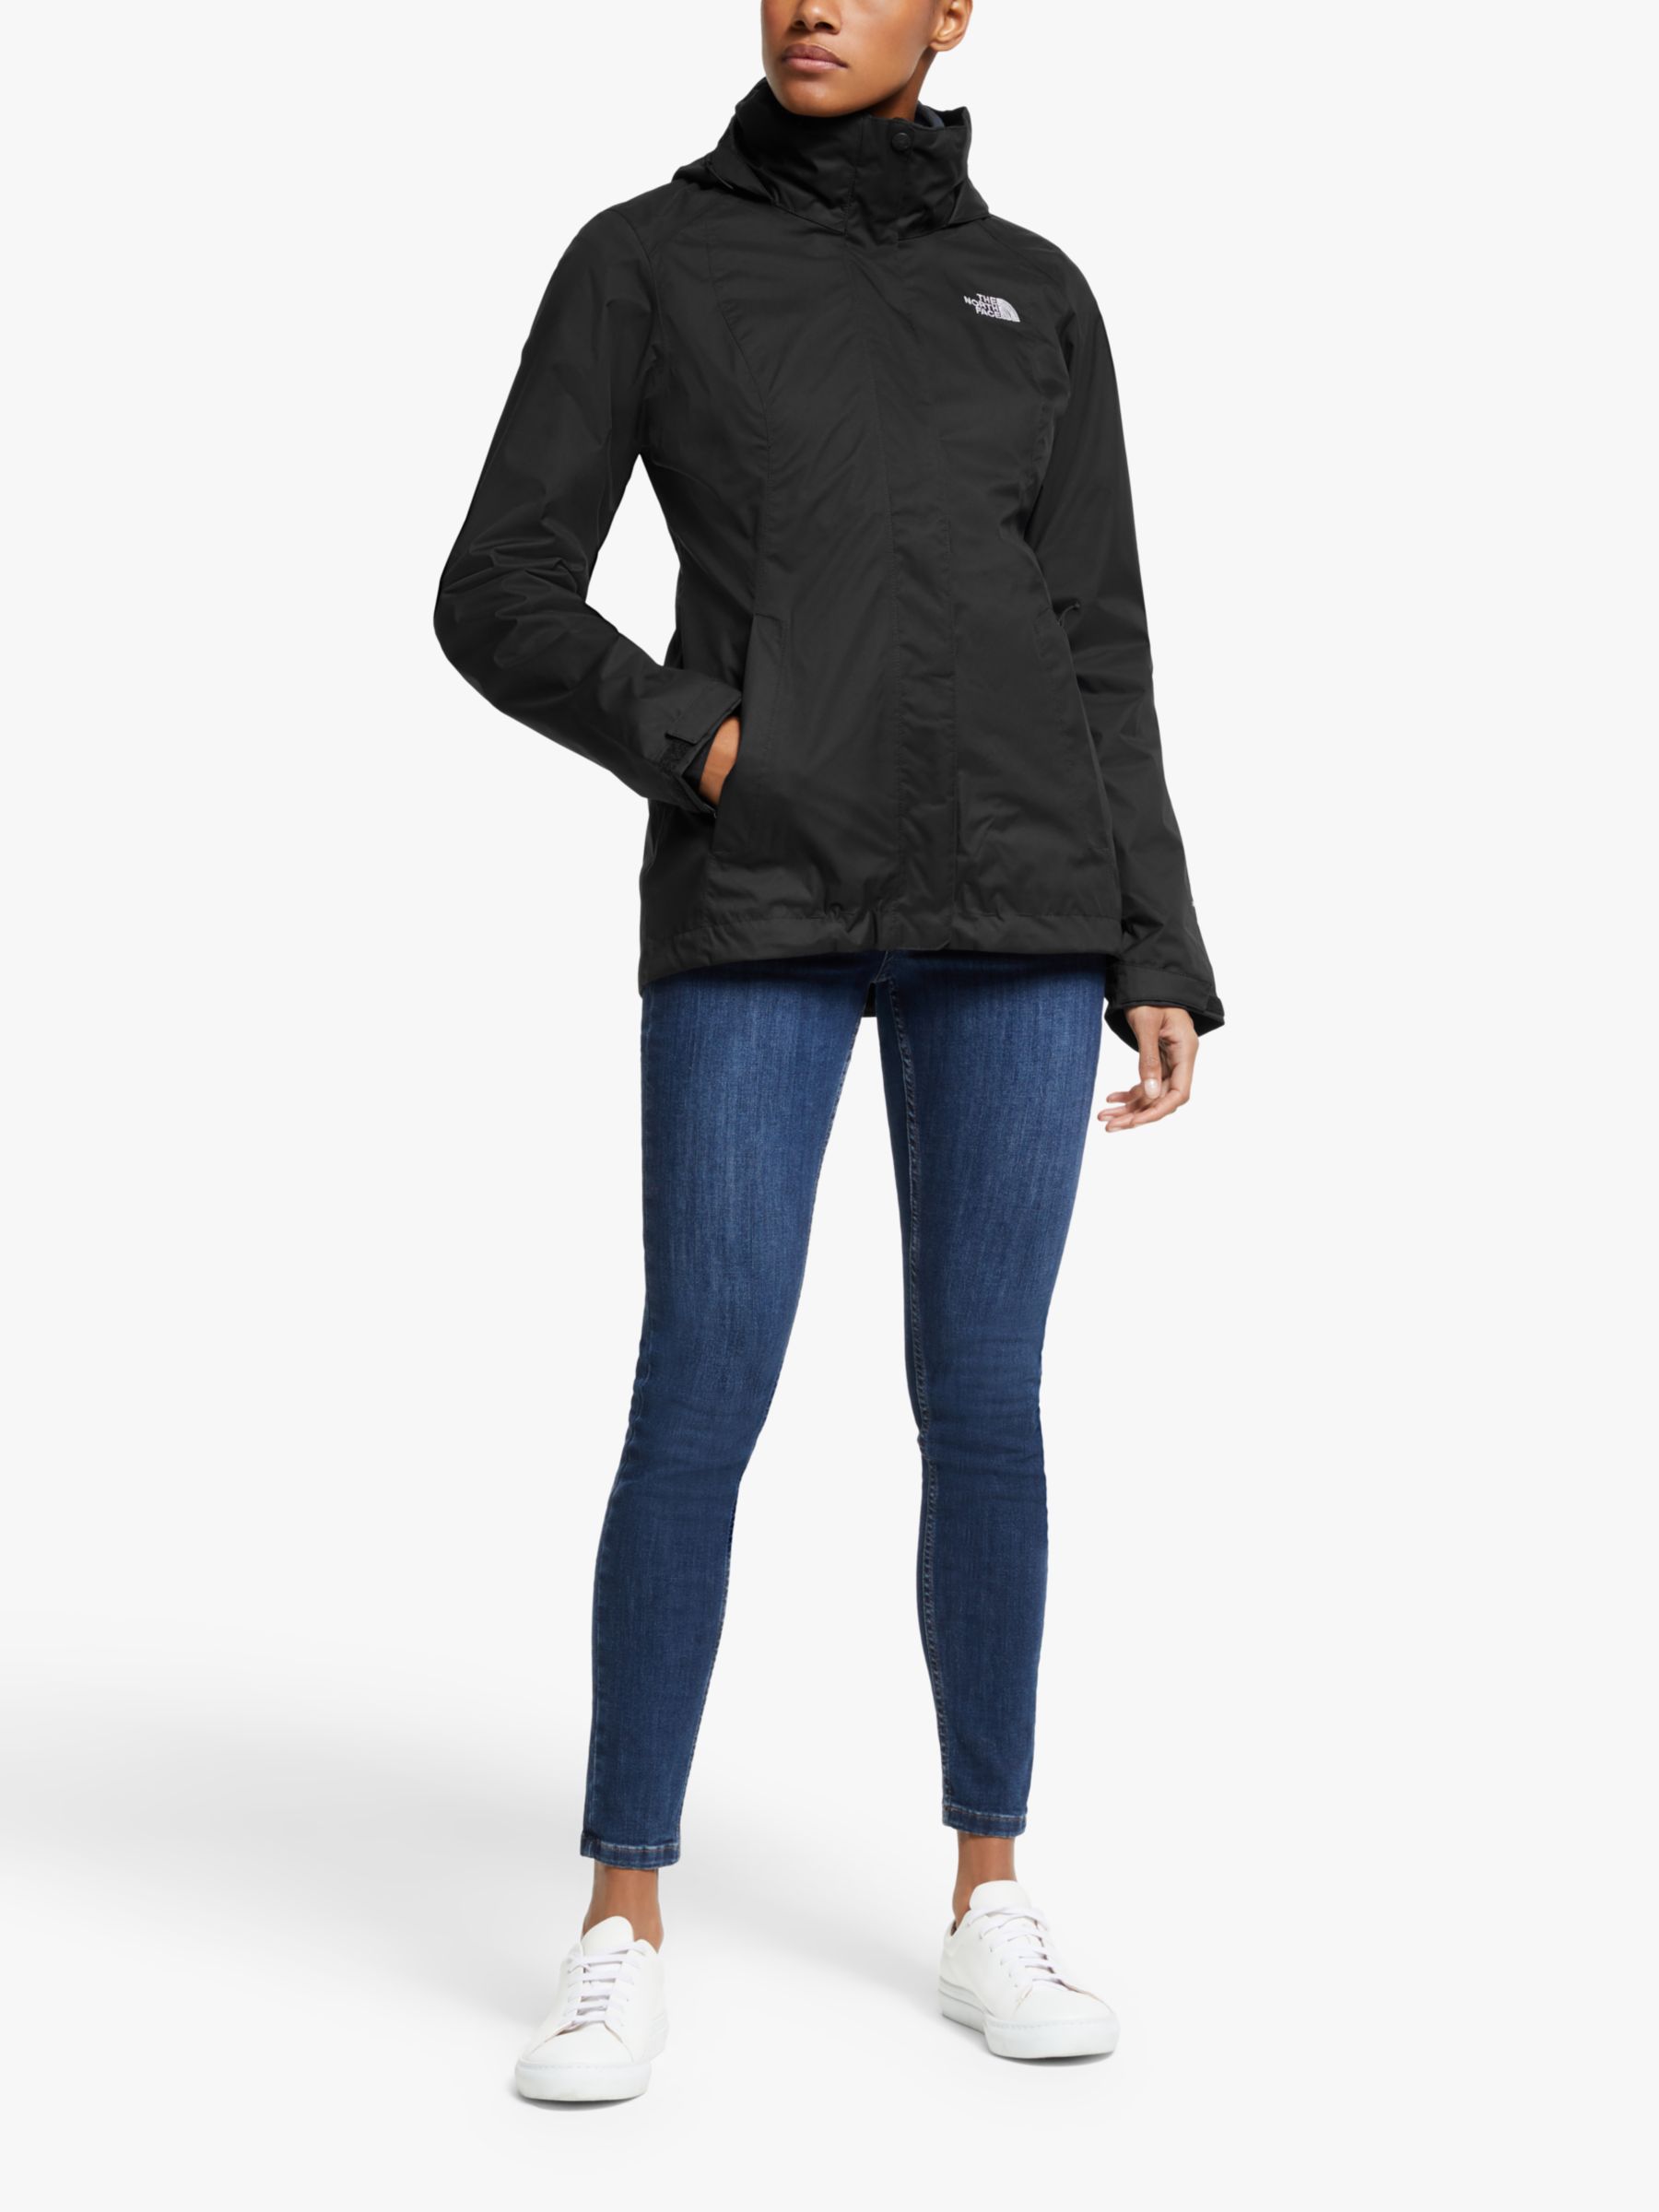 The North Face Womens Evolve II Triclimate Jacket - Women's from